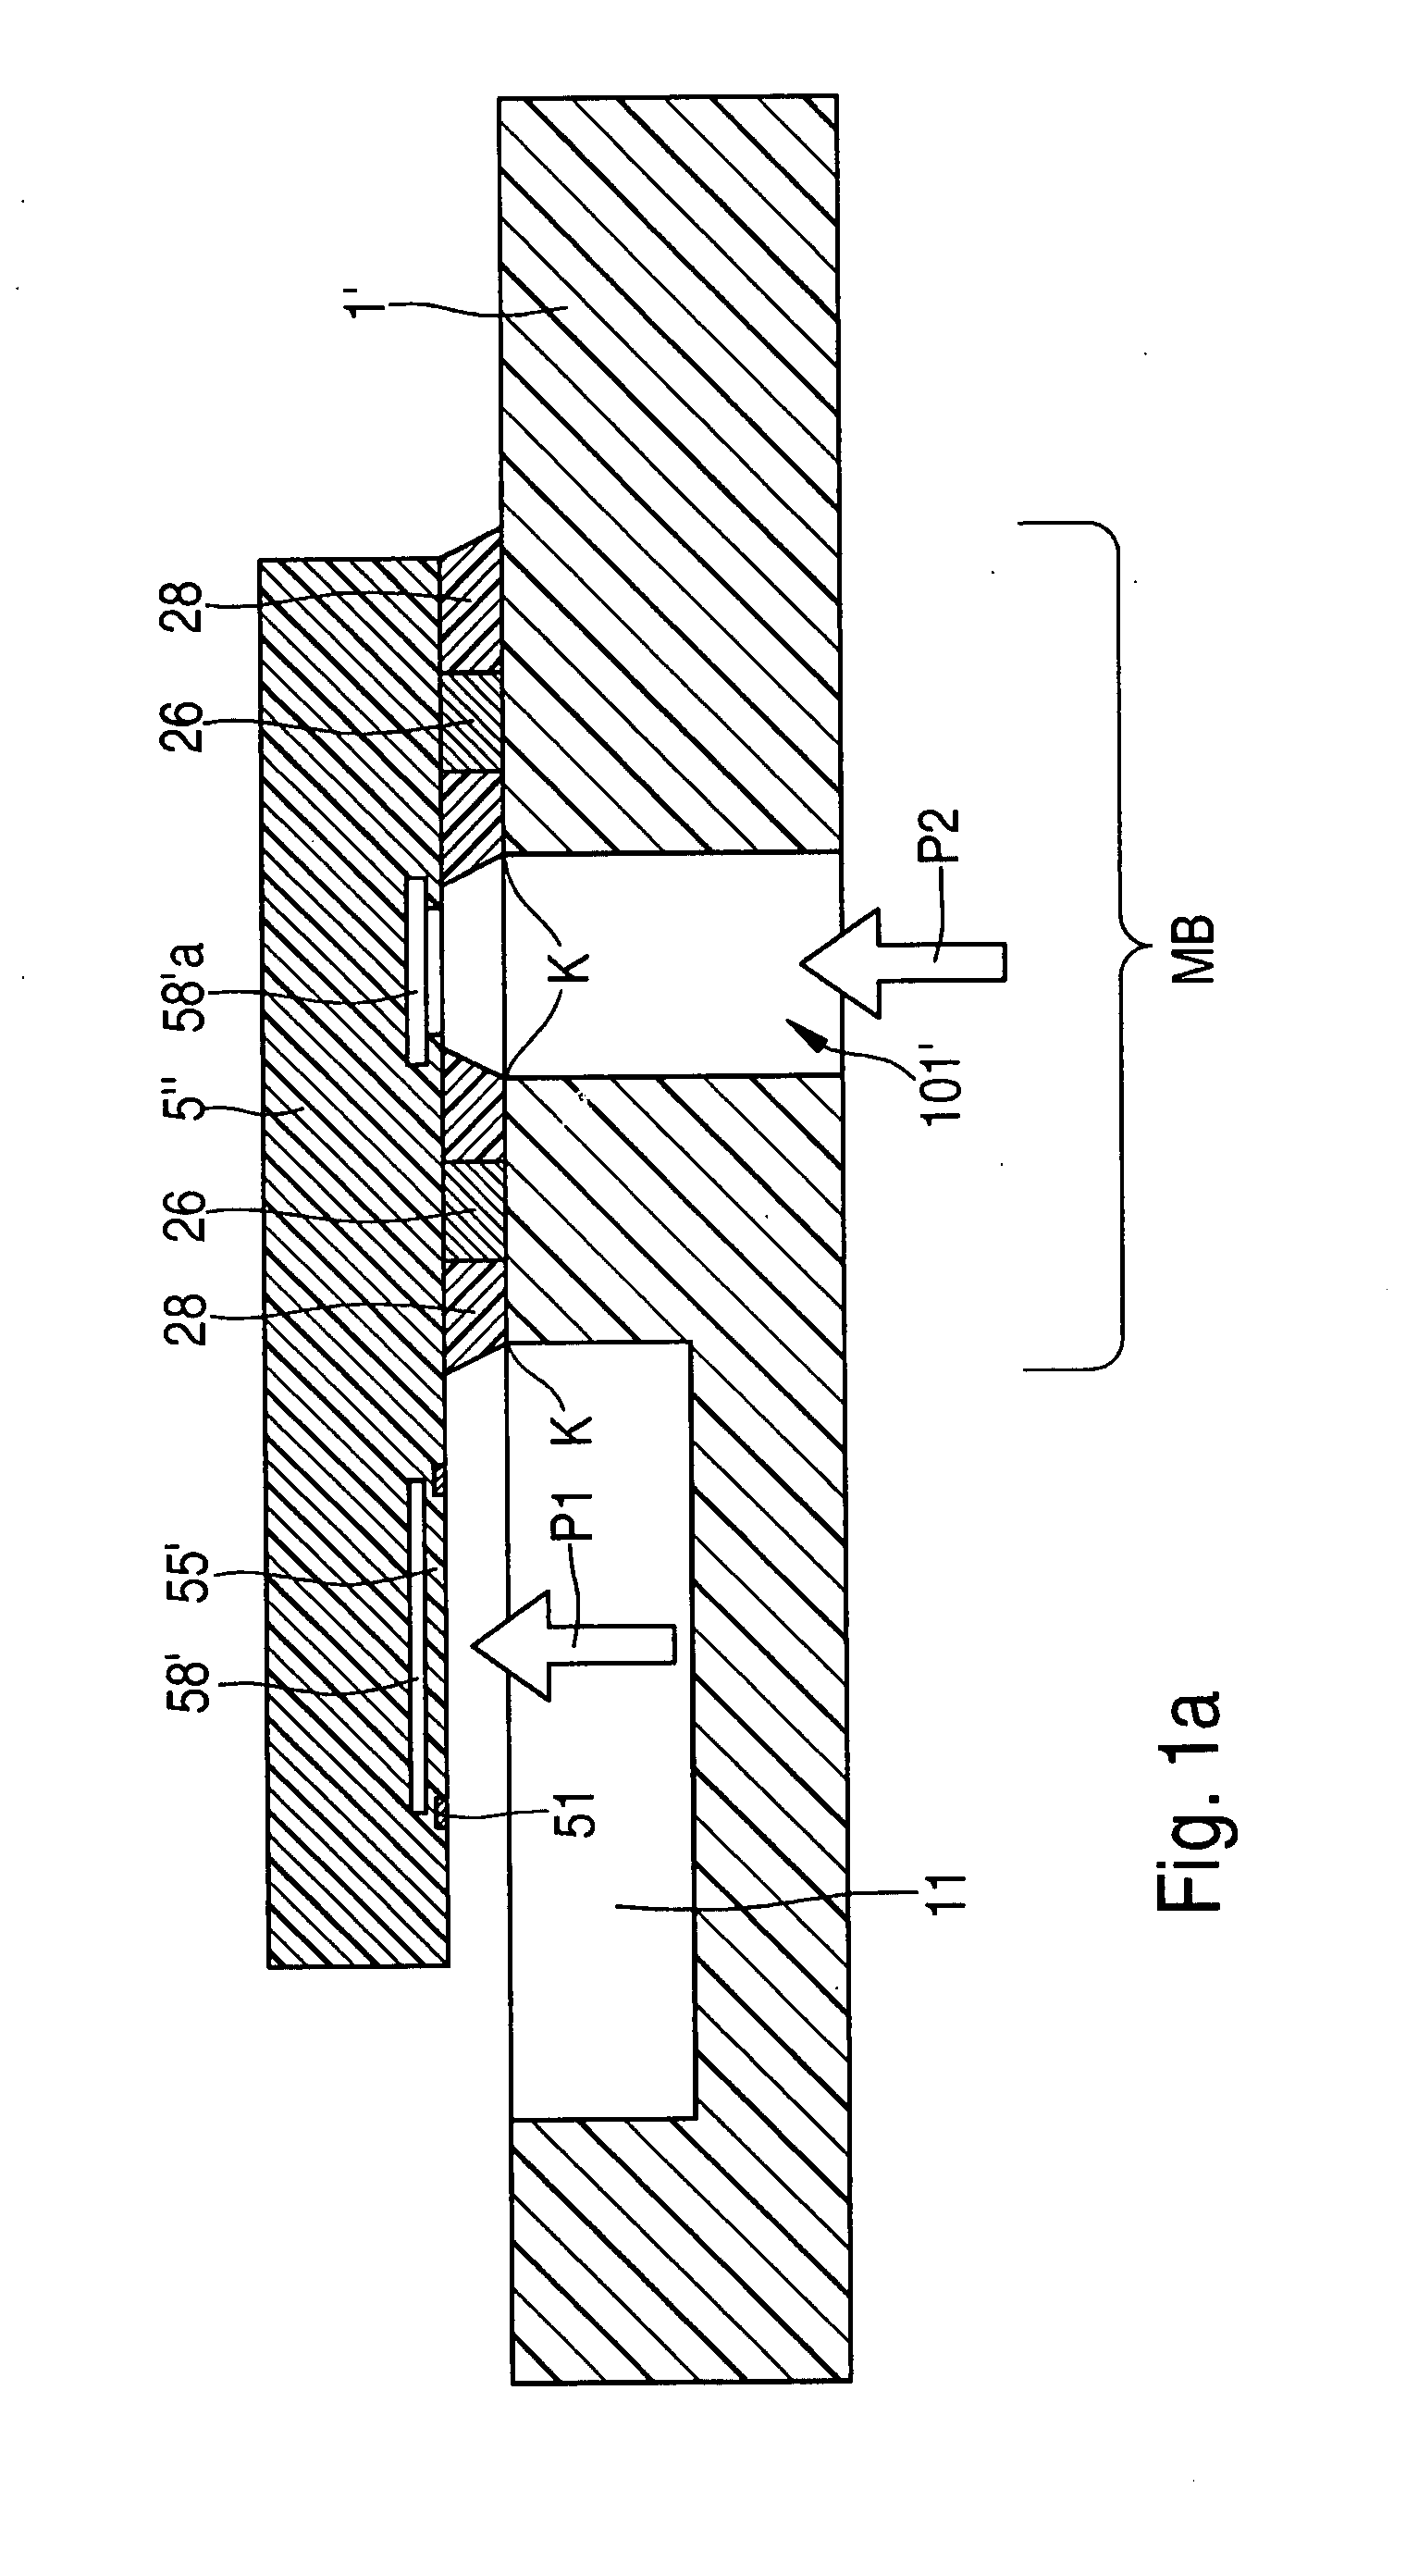 Method For Mounting Semiconductor Chips, and Corresponding Semiconductor Chip System